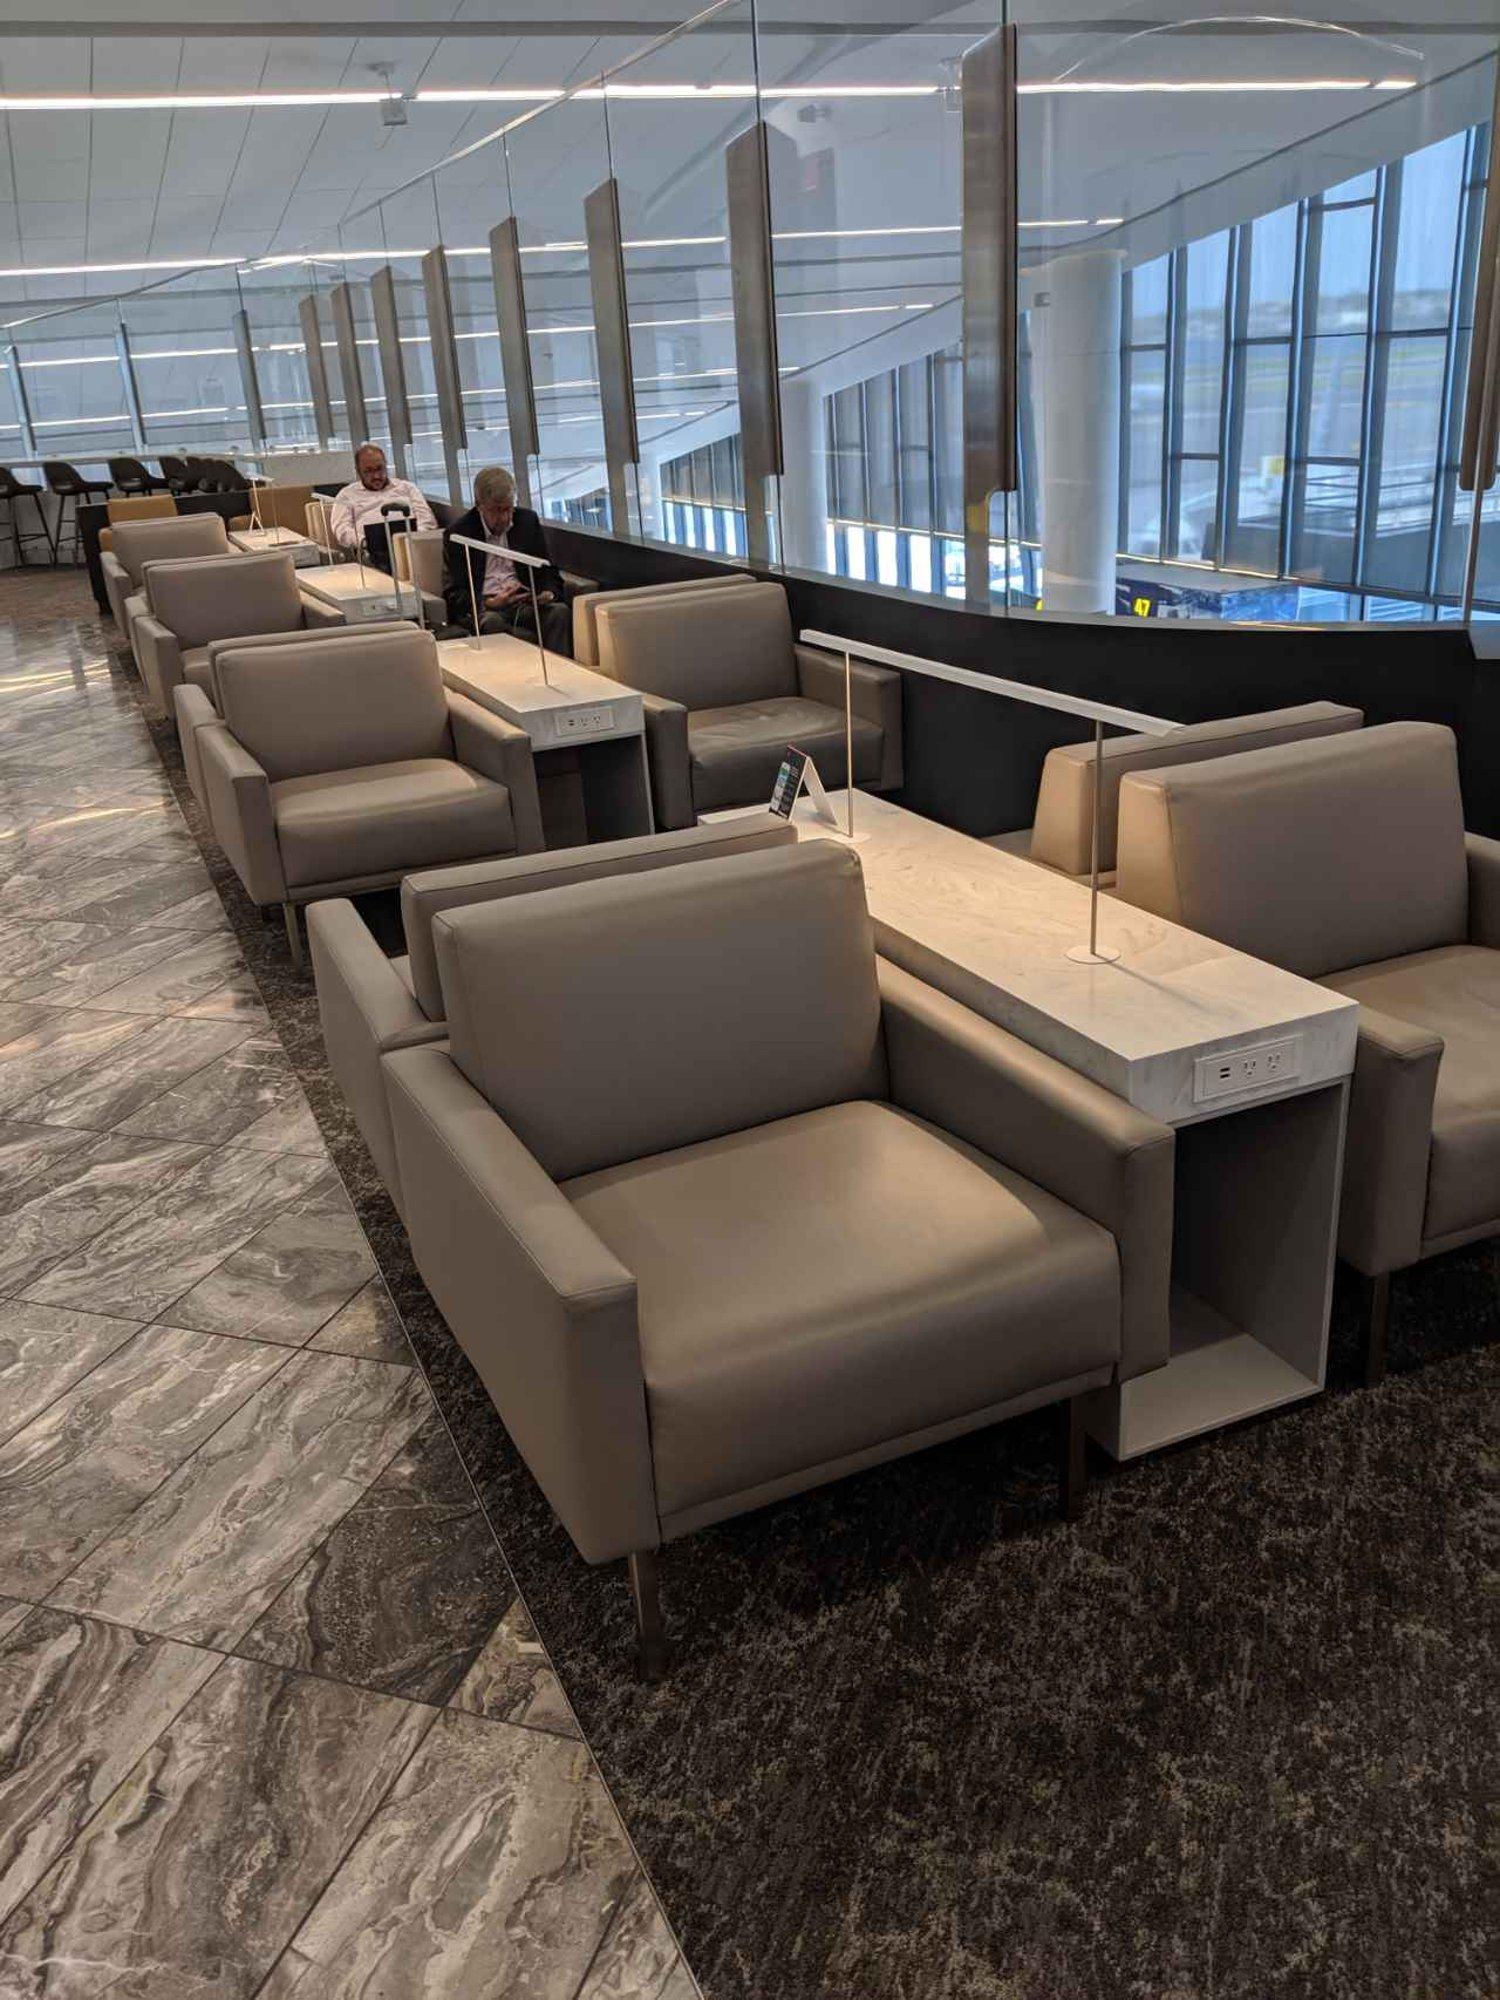 Air Canada Maple Leaf Lounge image 3 of 4